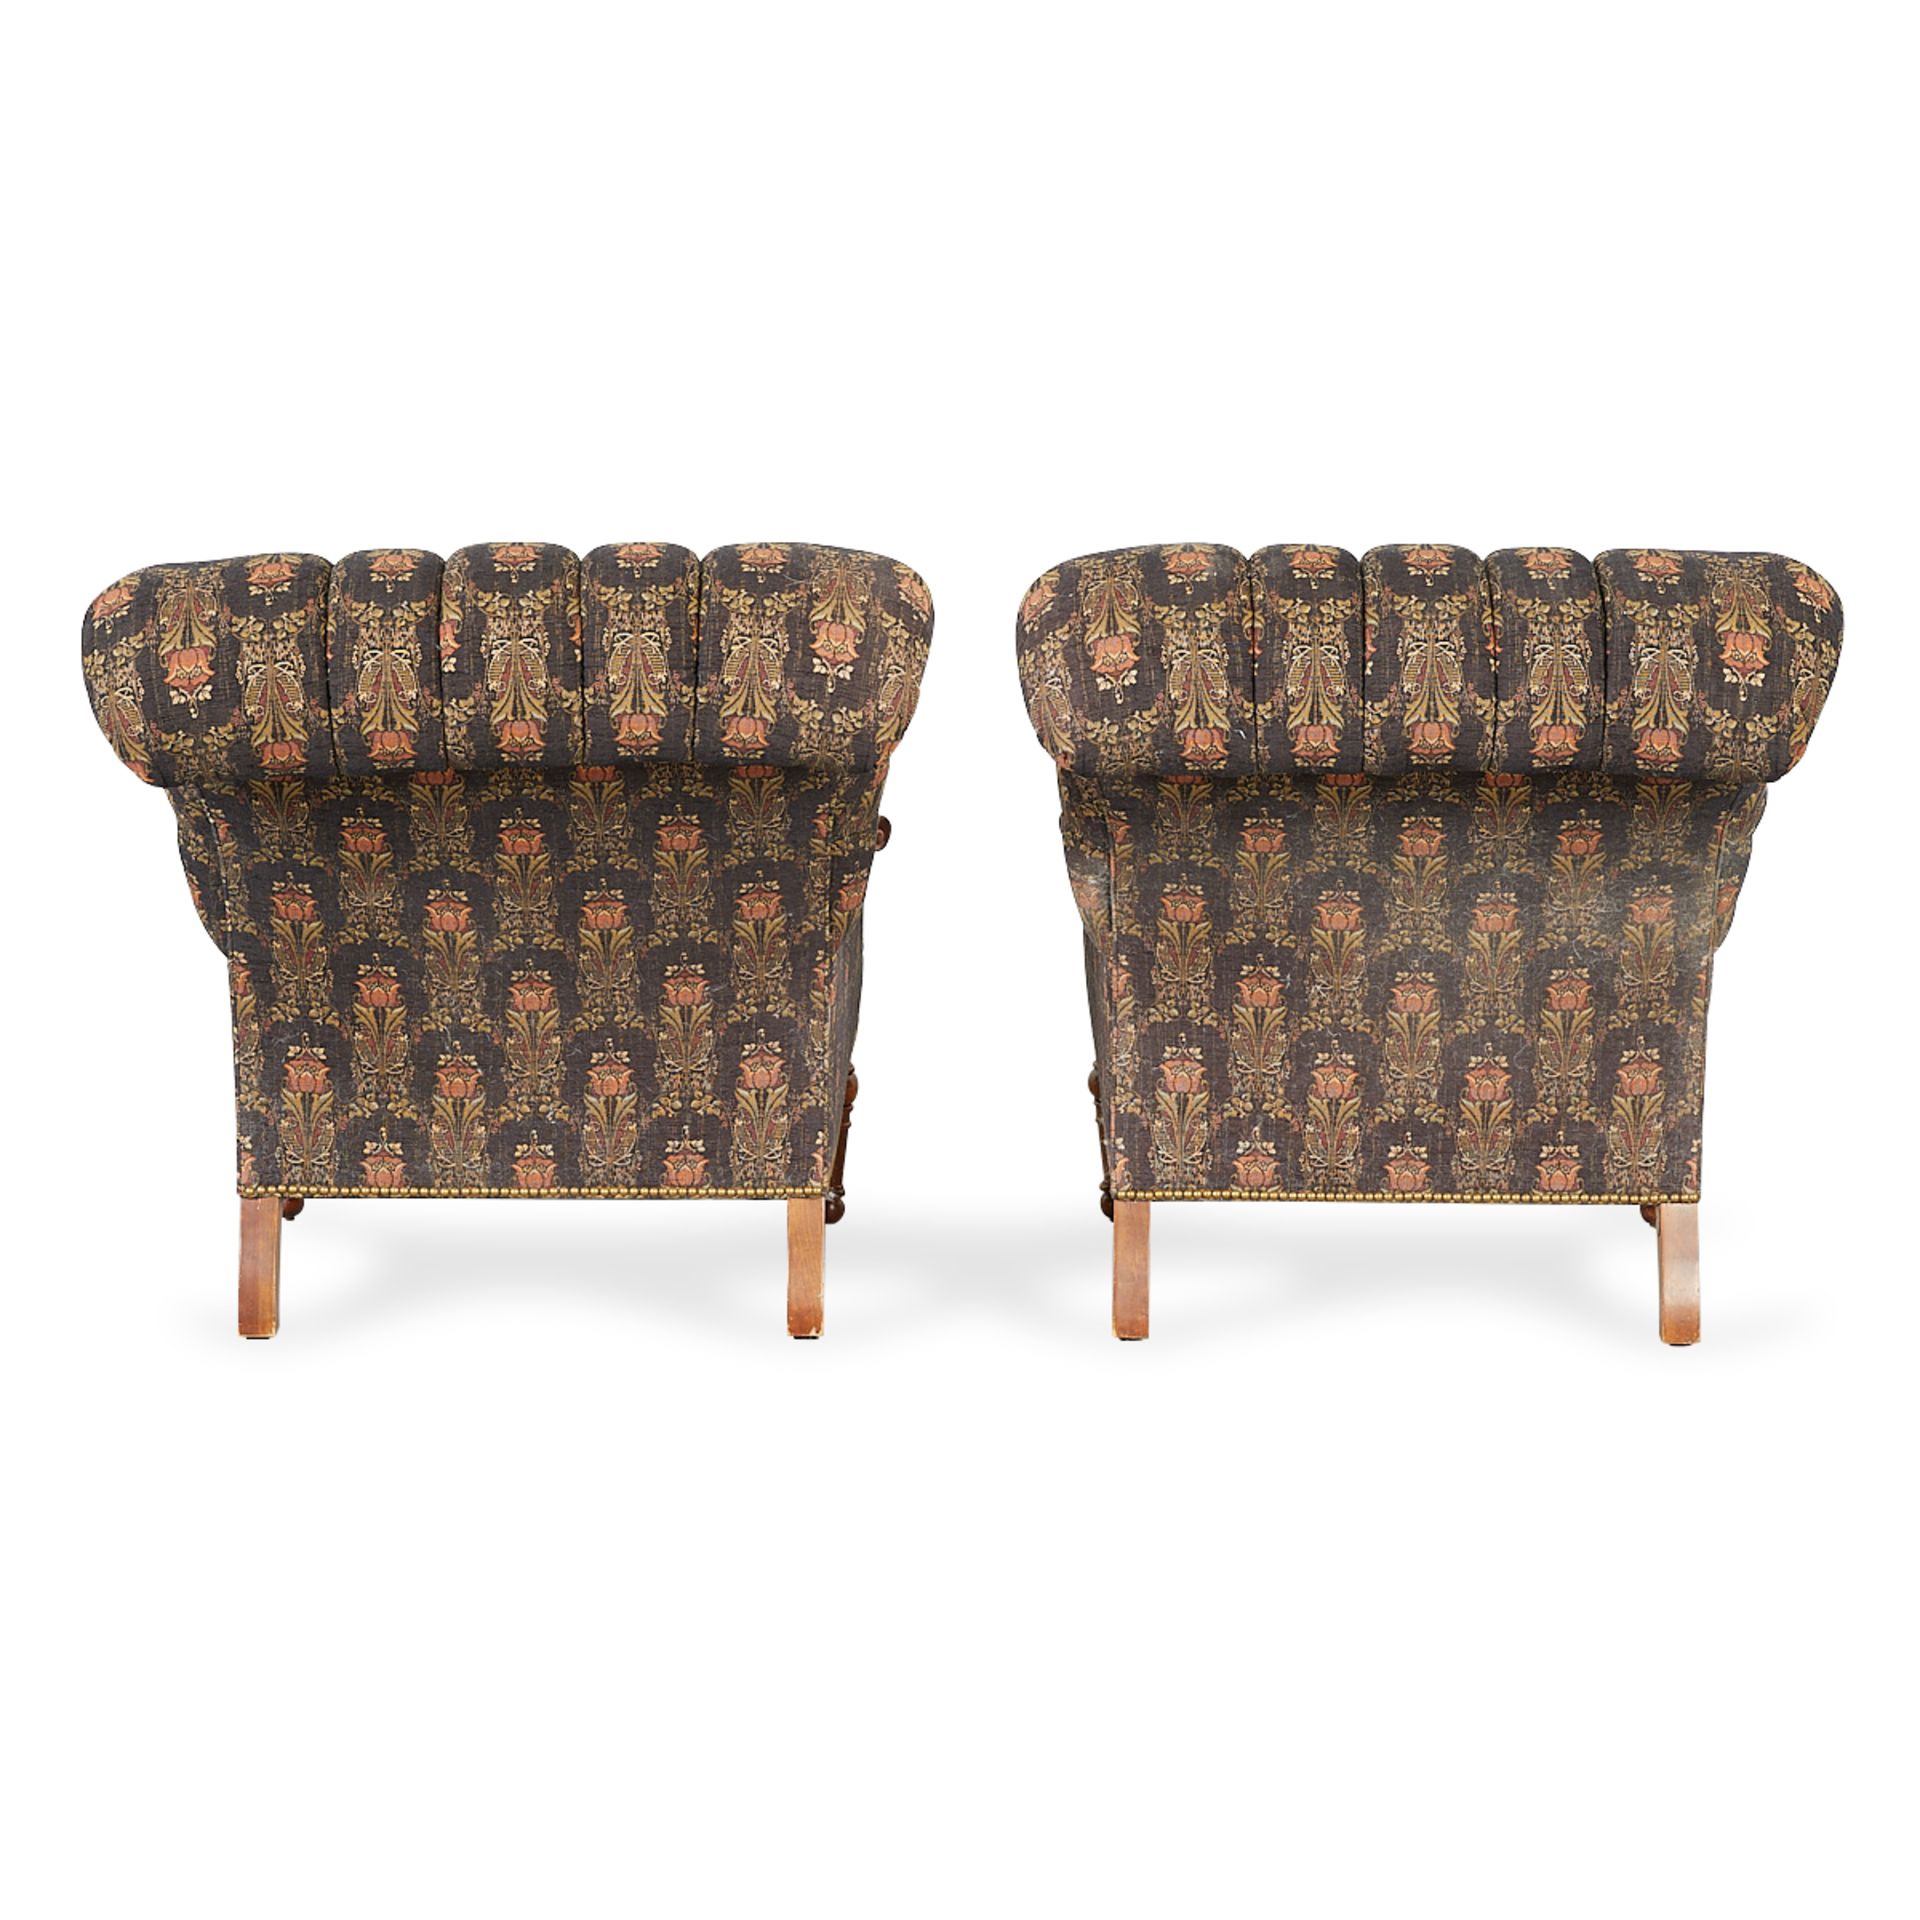 Pair of Stickley Tufted Chairs w/Ottomans - Image 5 of 22